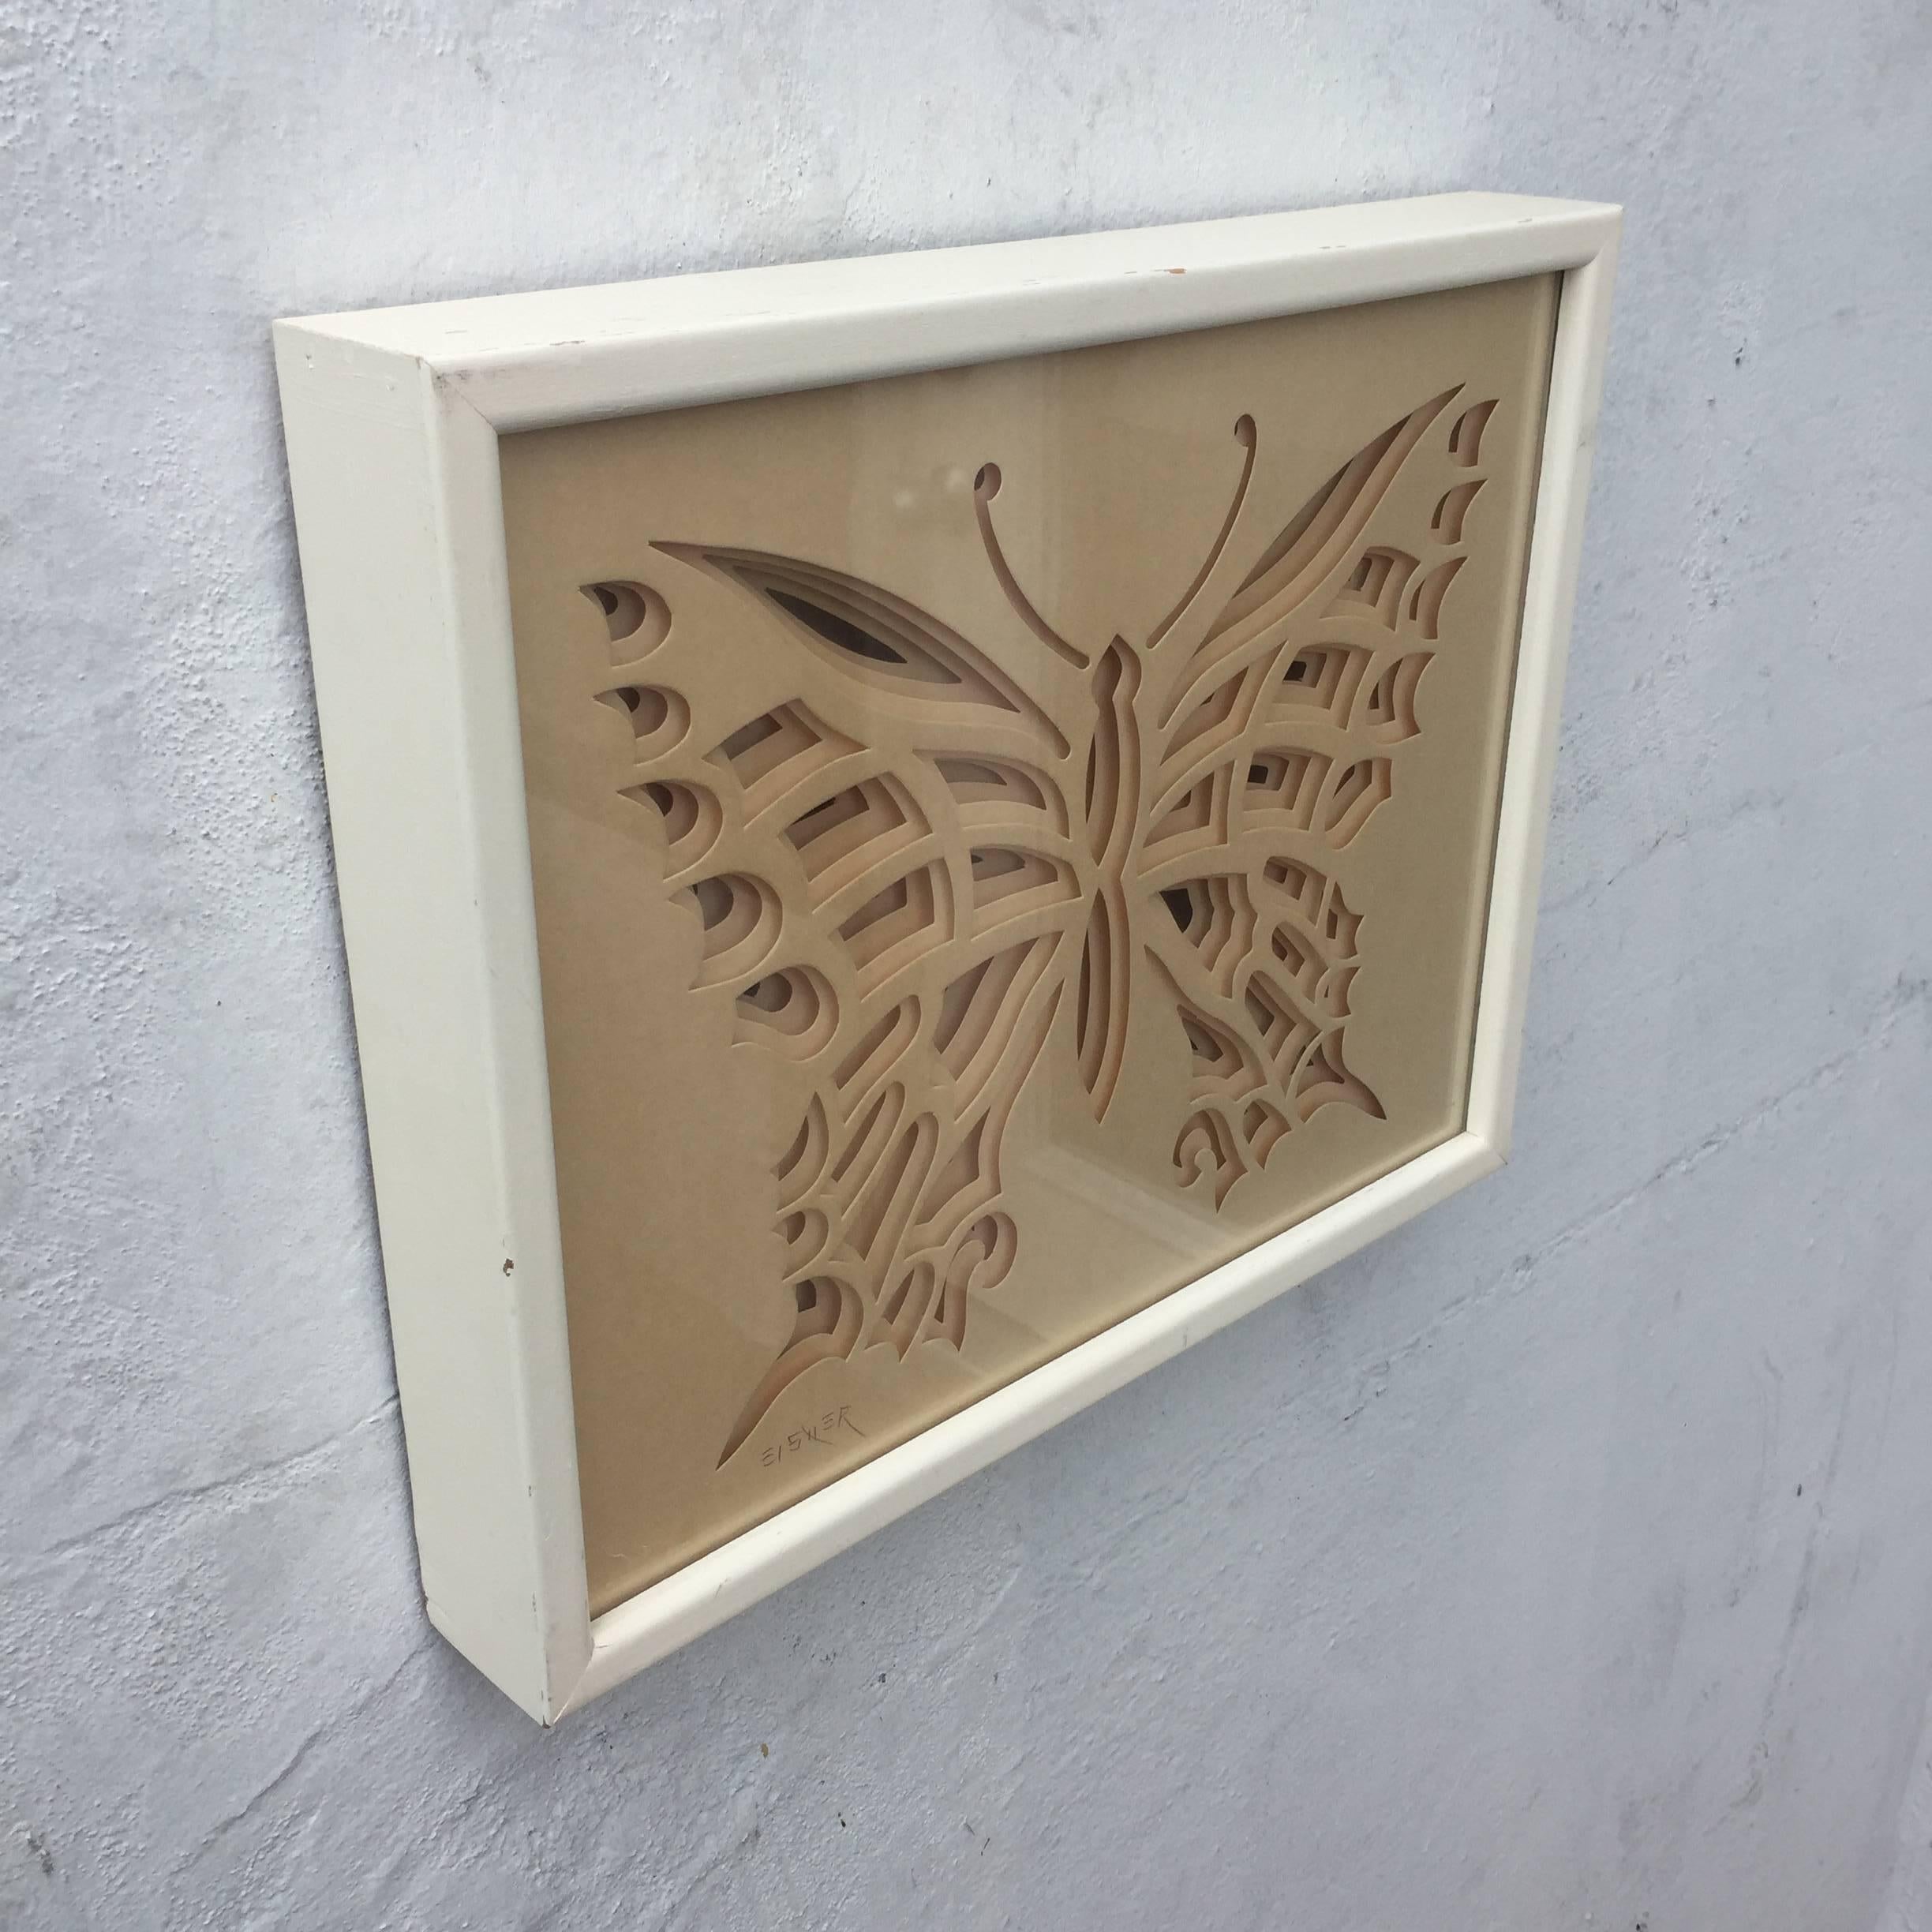 Creative three dimensional paper sculpture of a butterfly signed Eisner. In original wood frame. Signed.